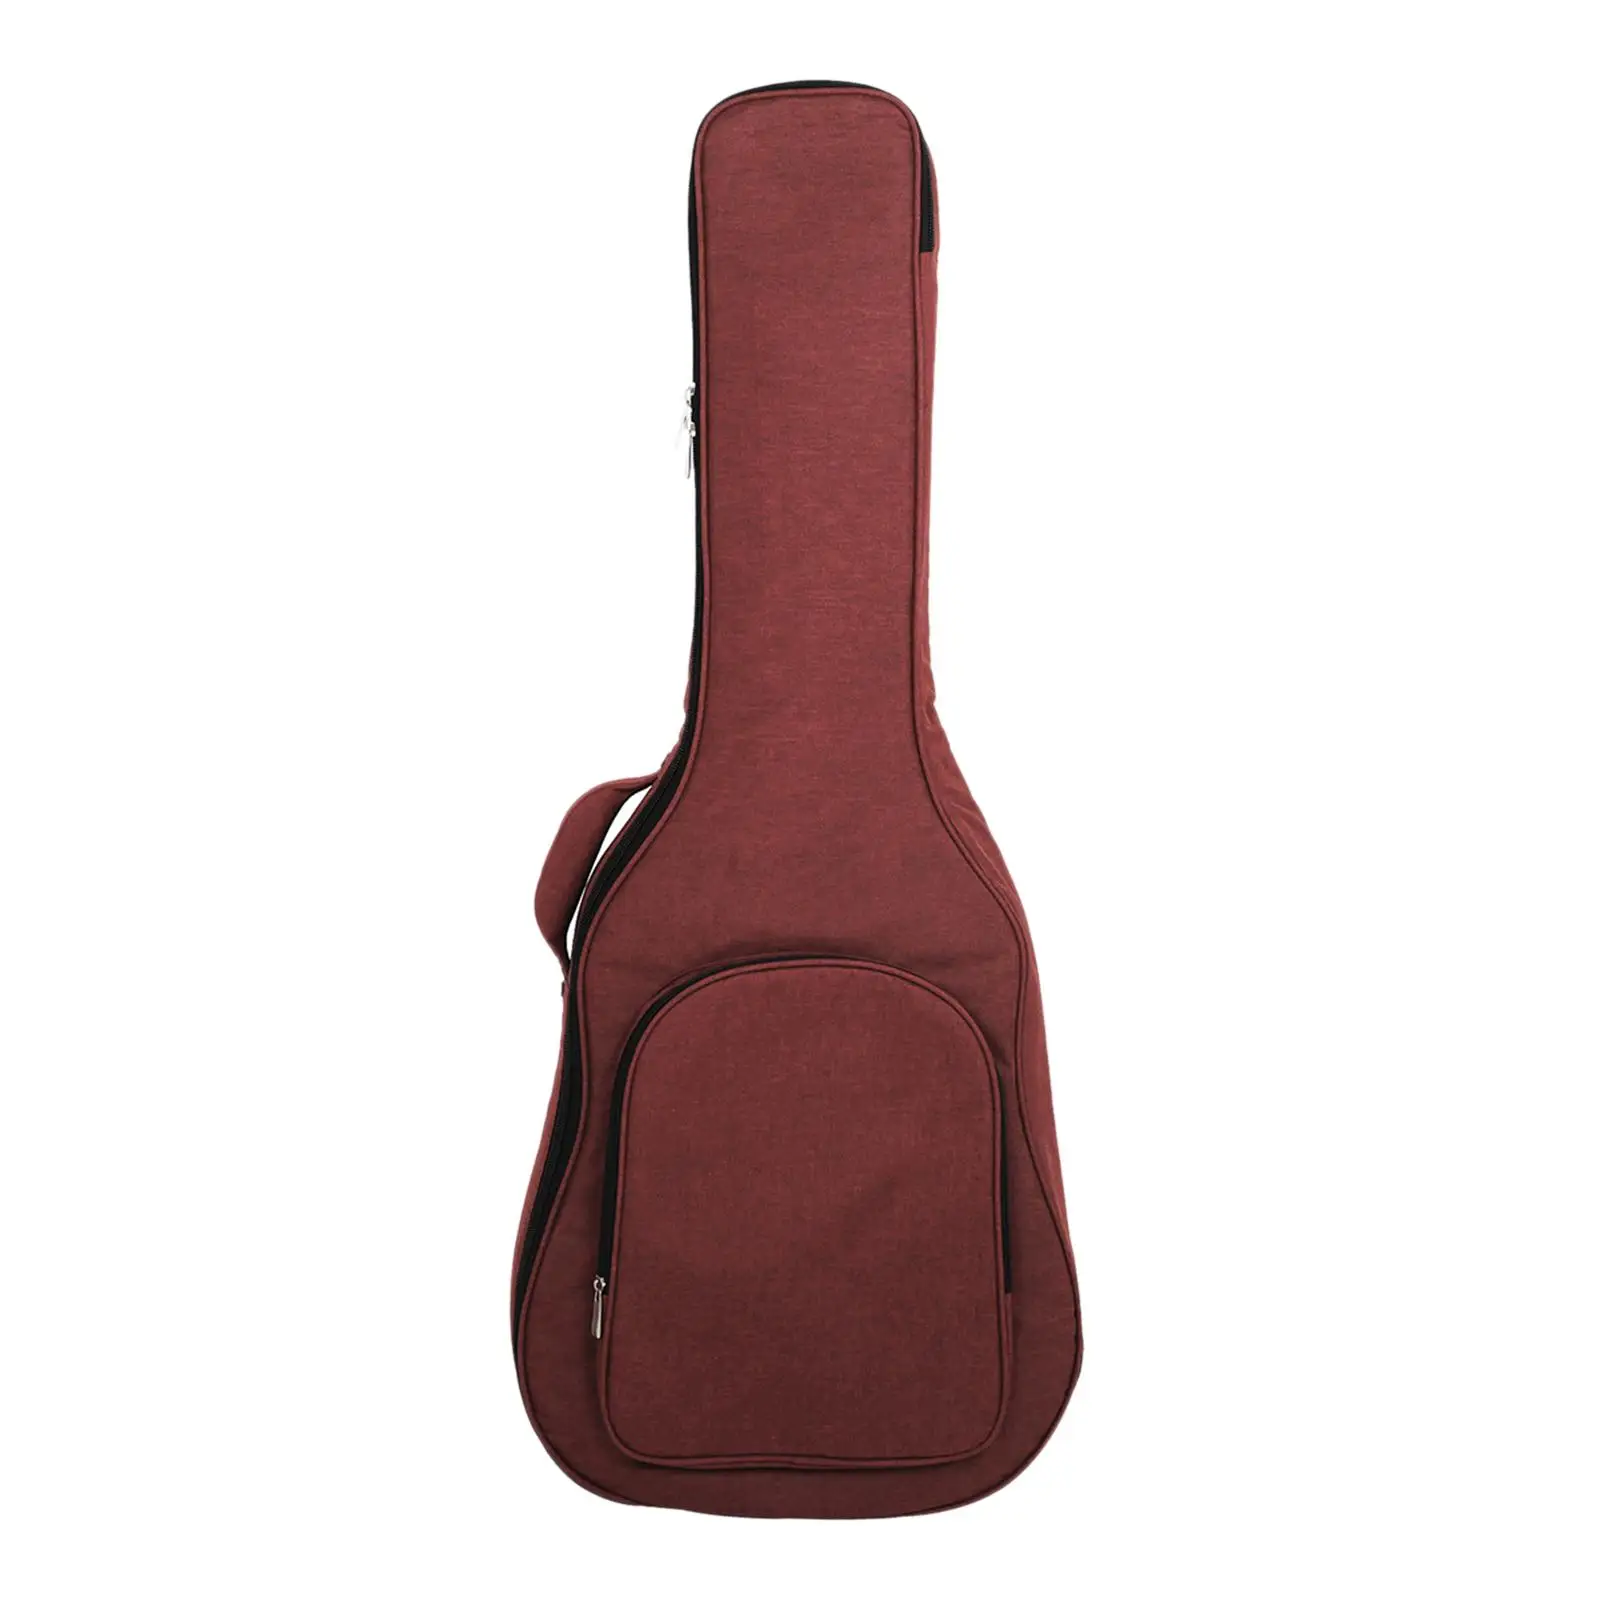 Large Guitar Case Backpack 42inch Oxford Dust Cover for Electric Bass Folk Guitar